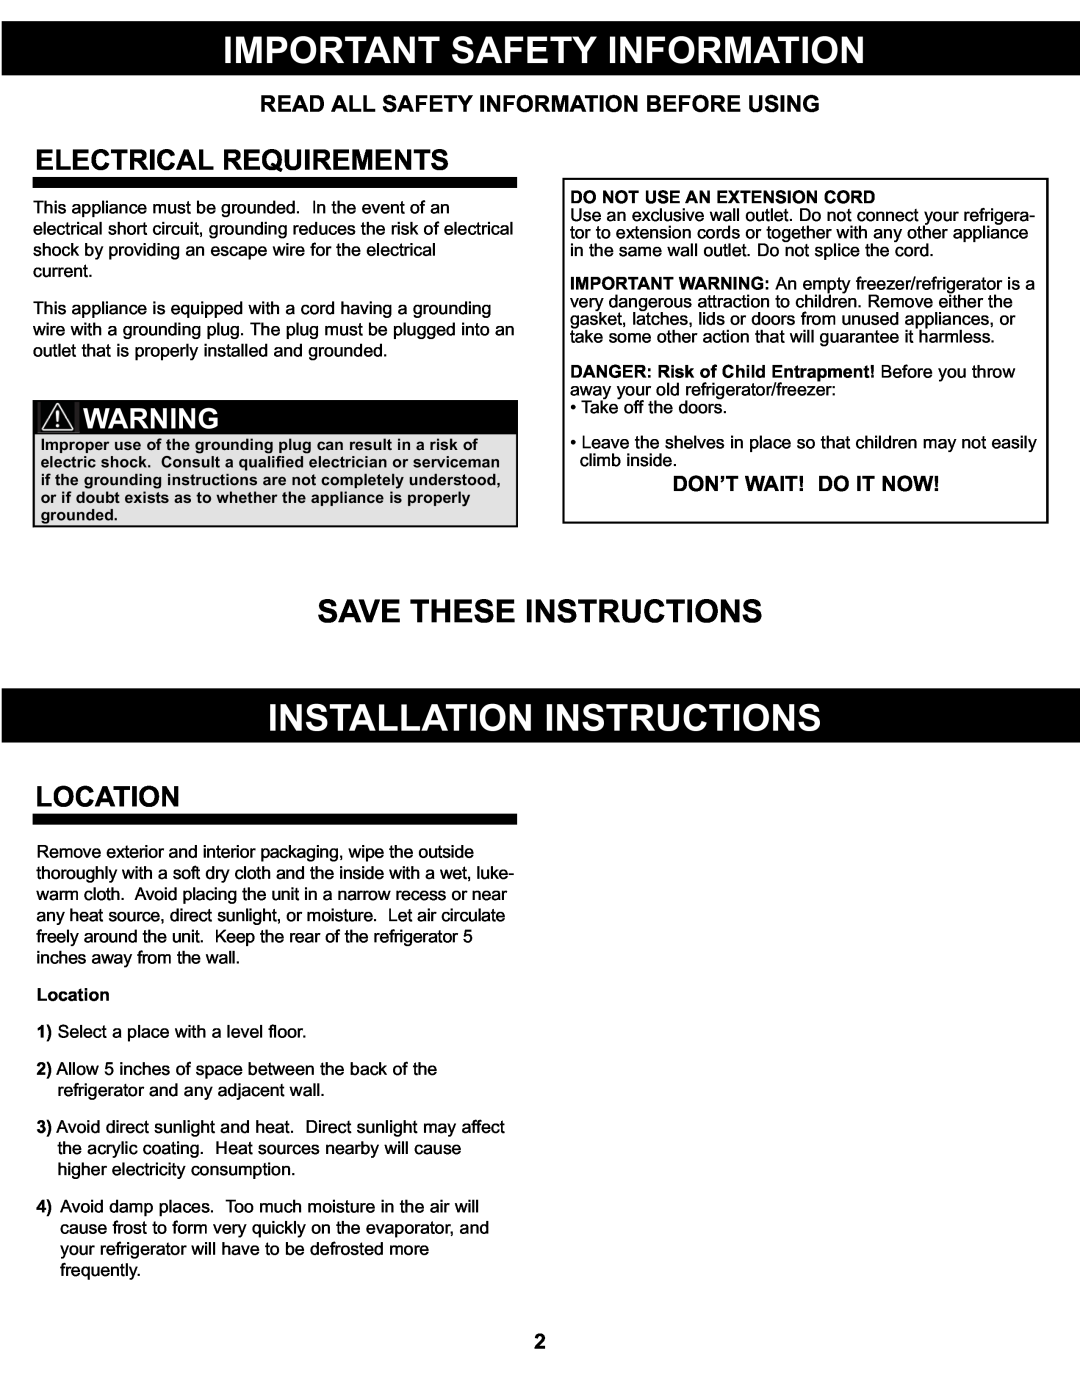 Sunbeam SBCR91BSL manual Important Safety Information, Installation Instructions, Save These Instructions, Location 